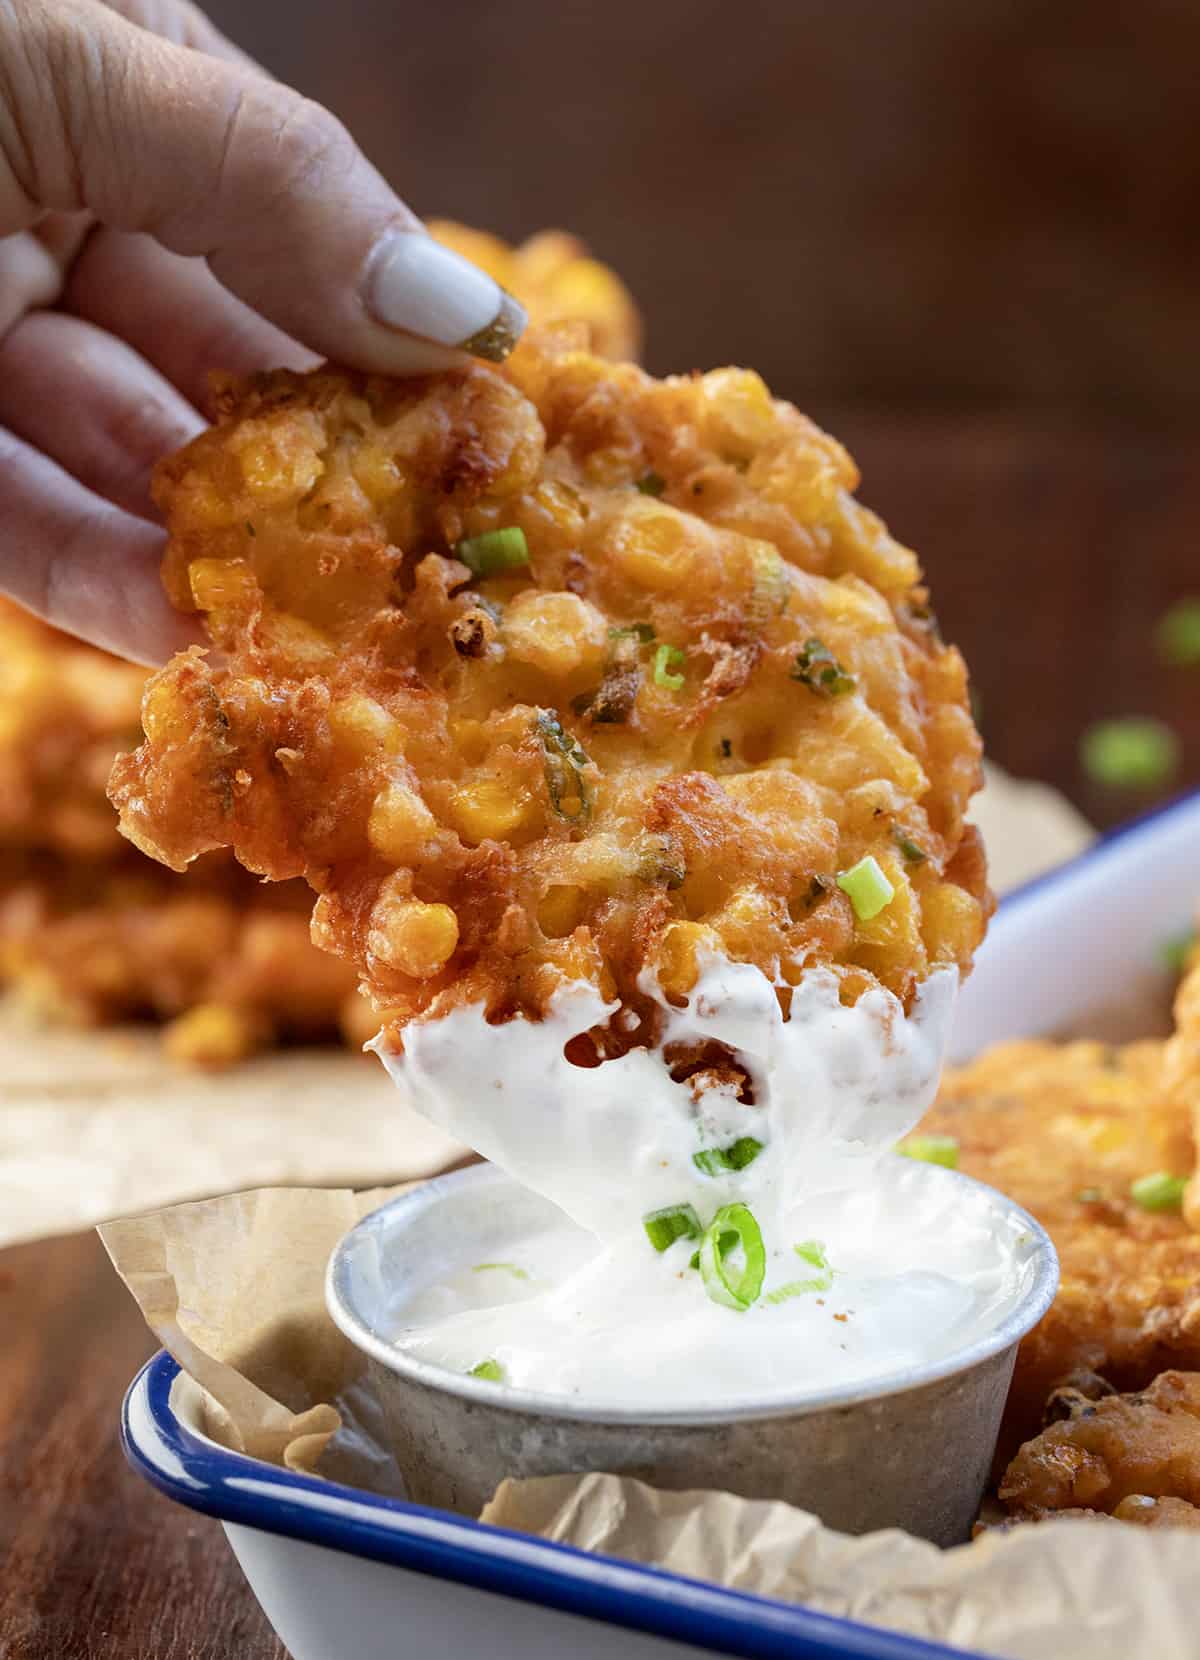 Hand Dipping Corn Fritter into Sour Cream Sauce.